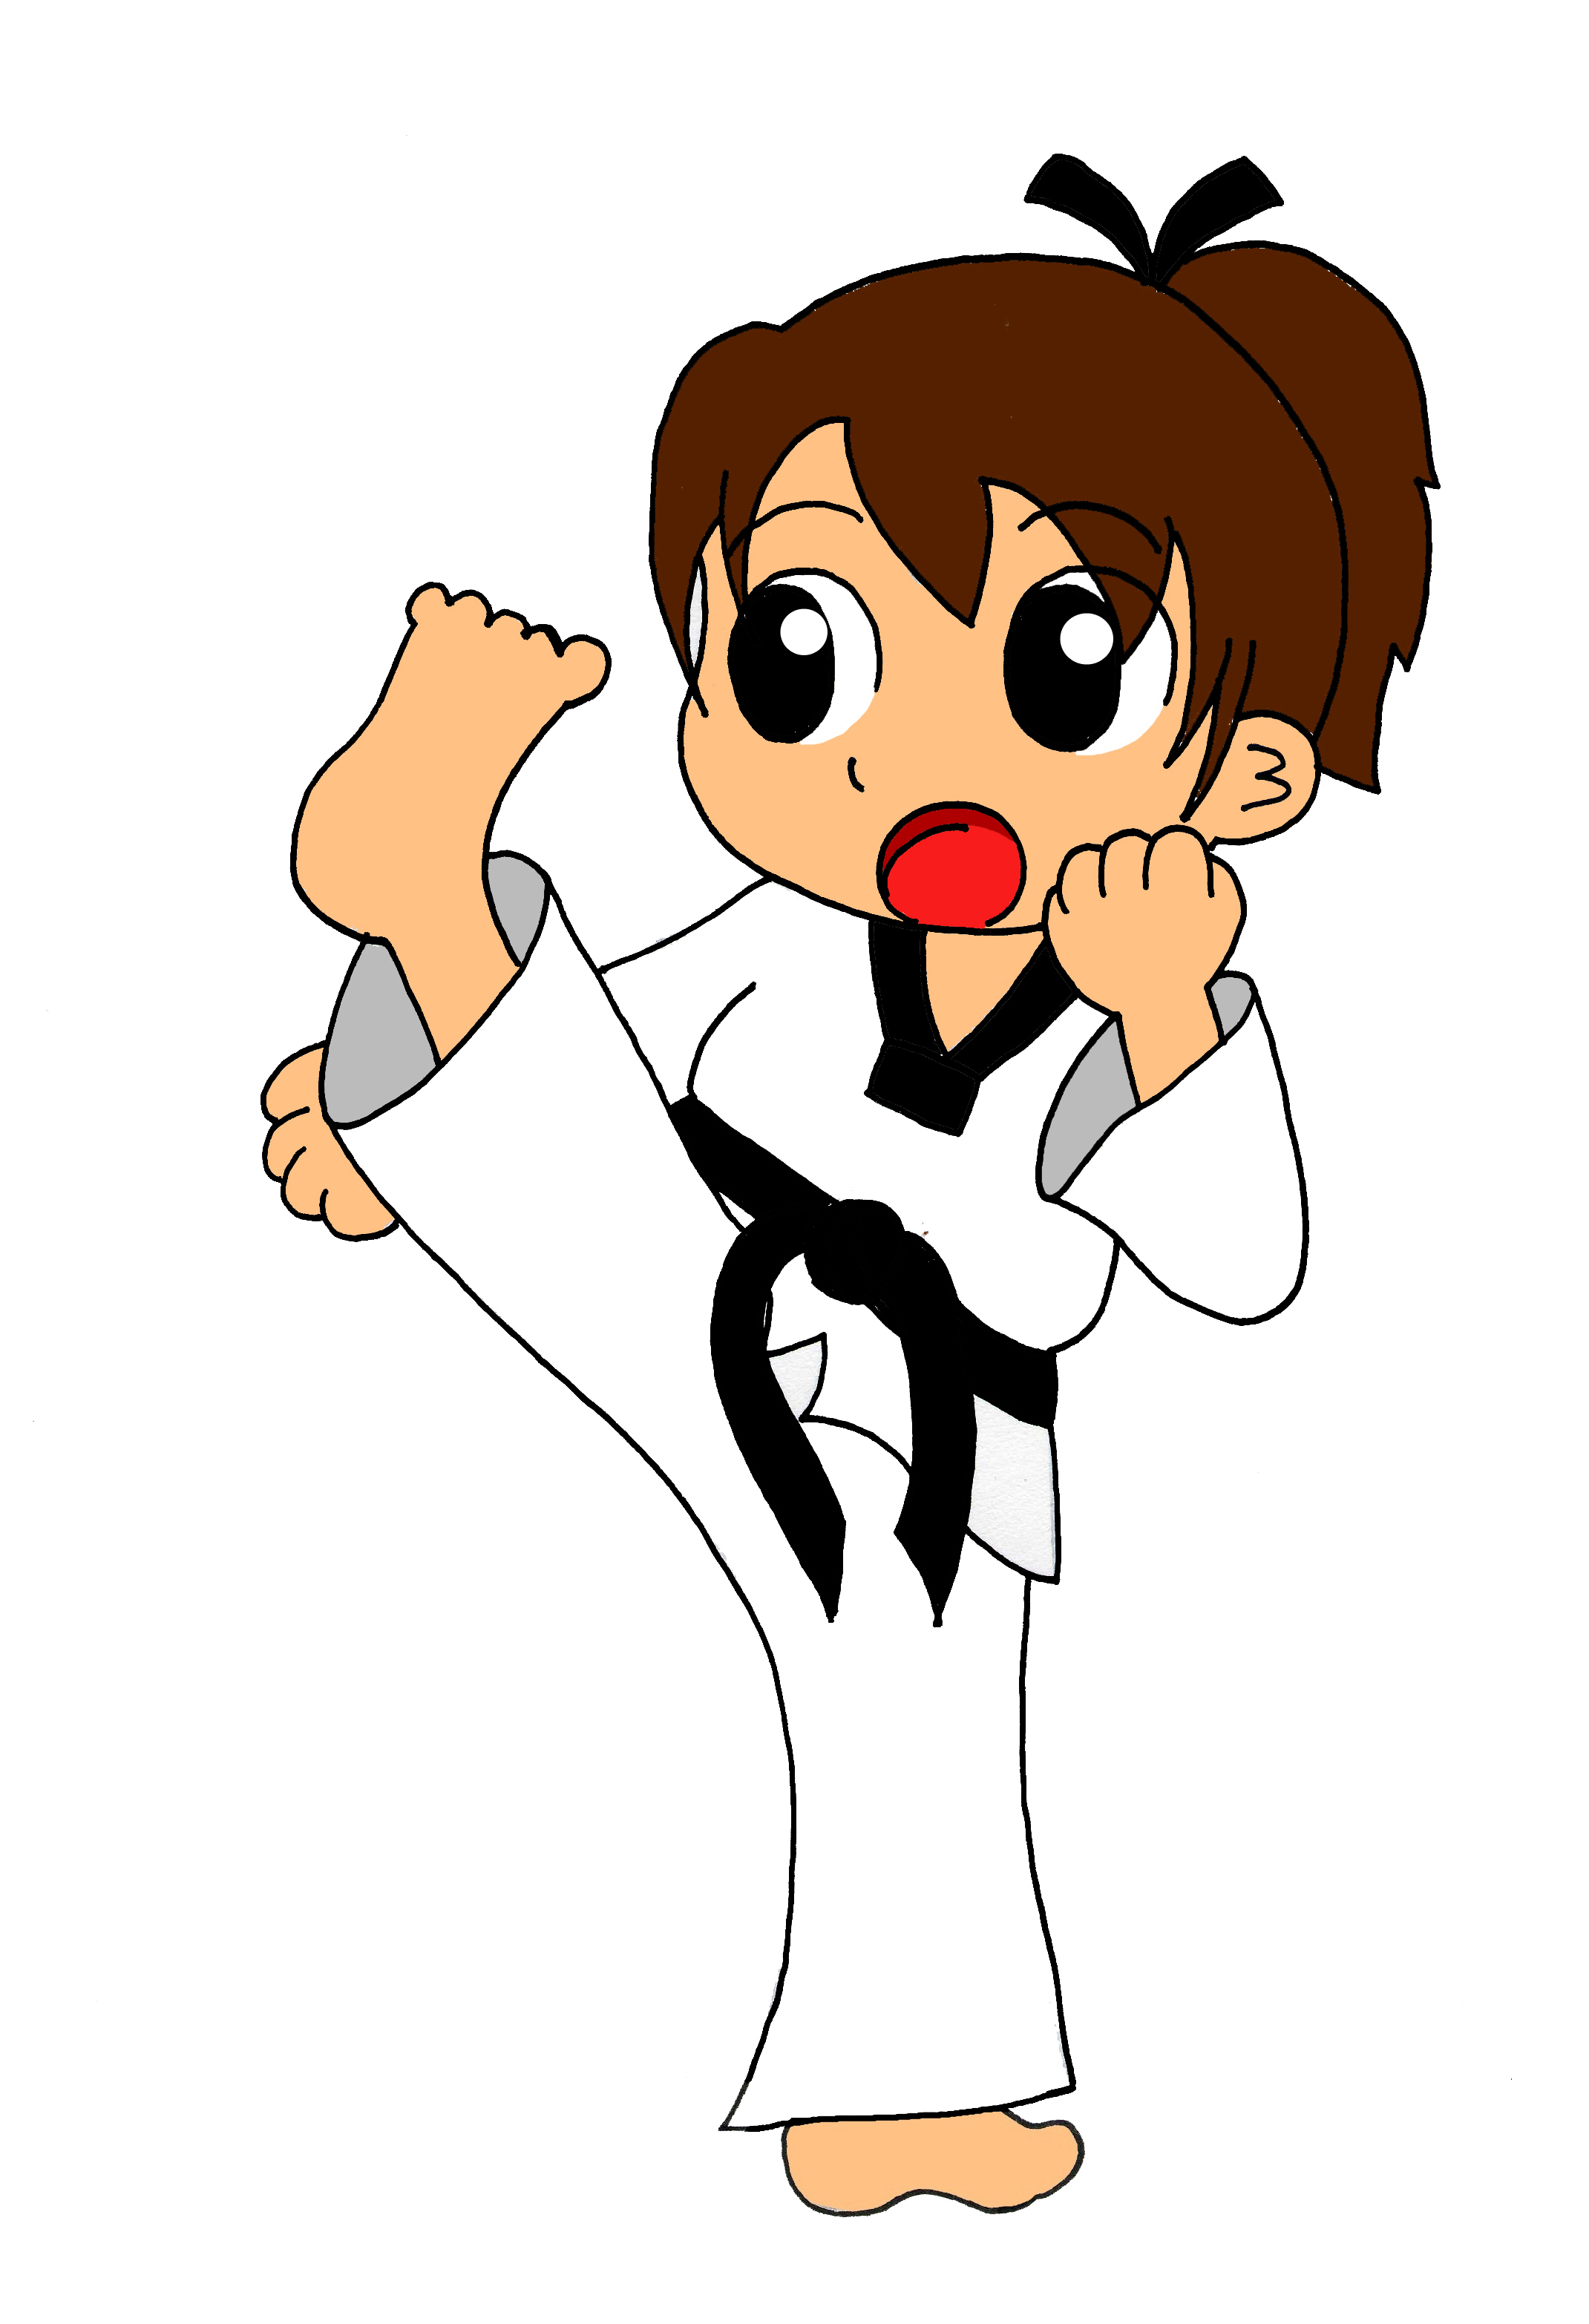 Karate clip art free download clipart images